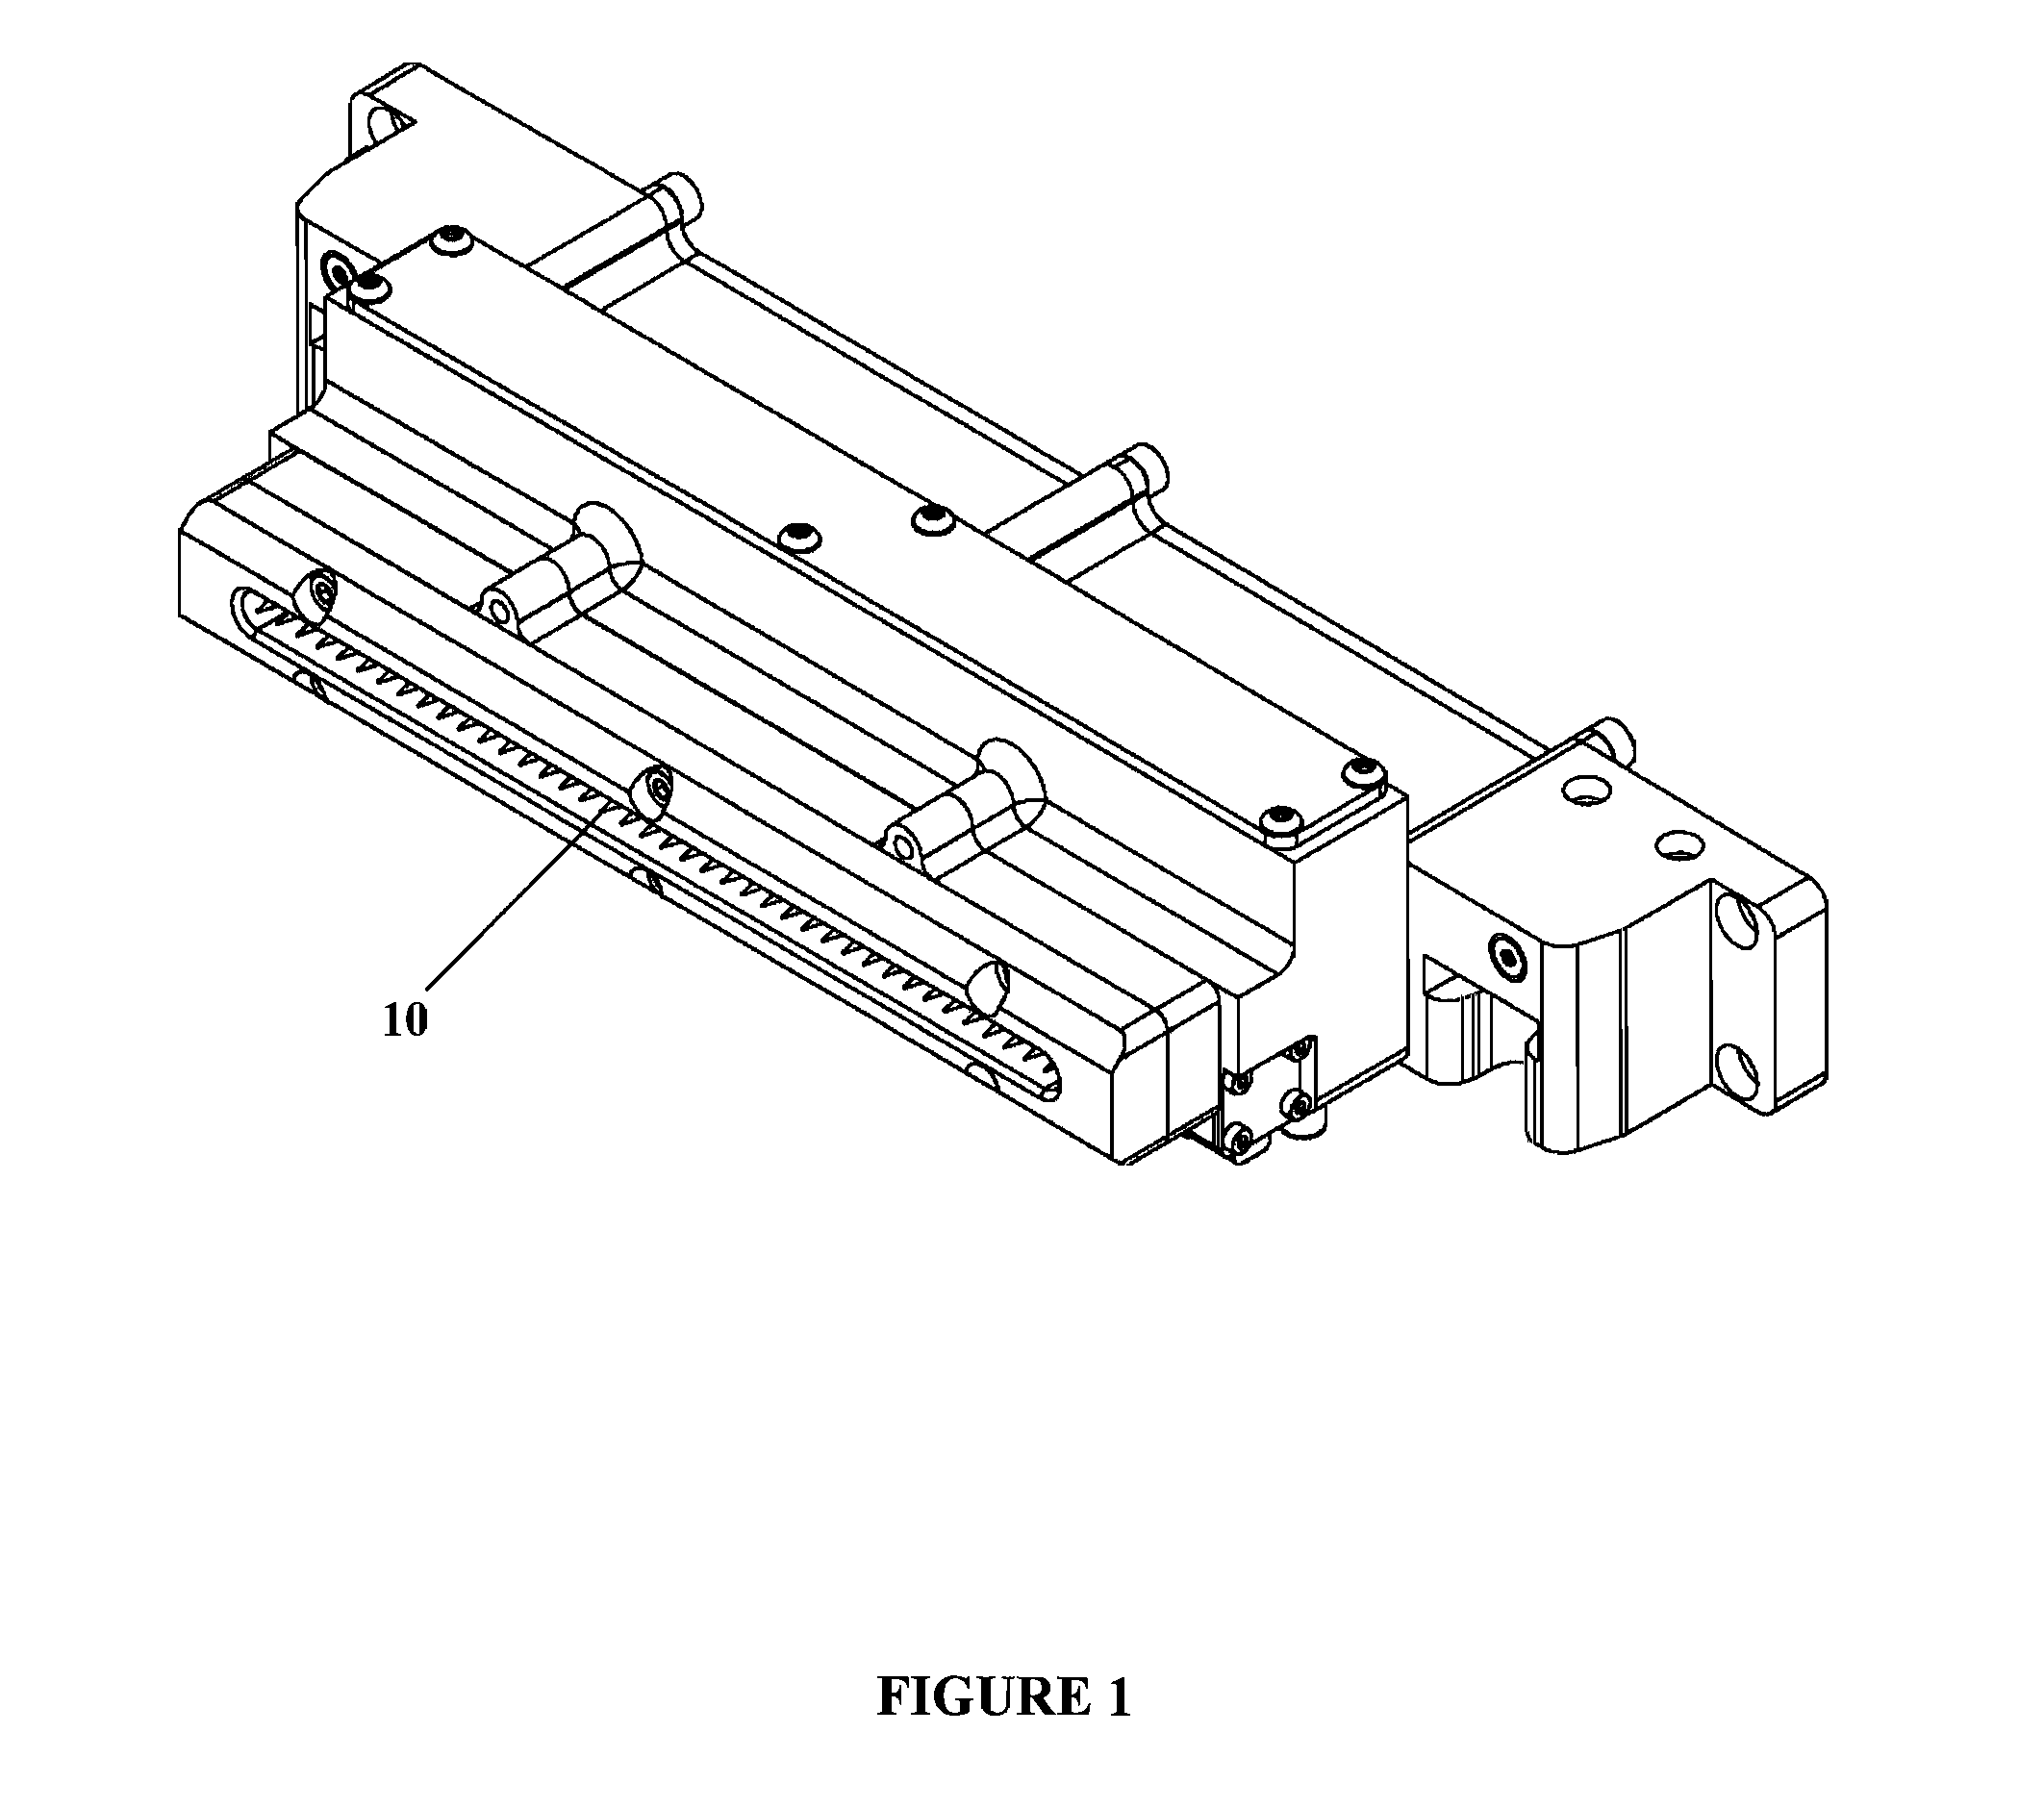 Aerosol Jet (R) printing system for photovoltaic applications